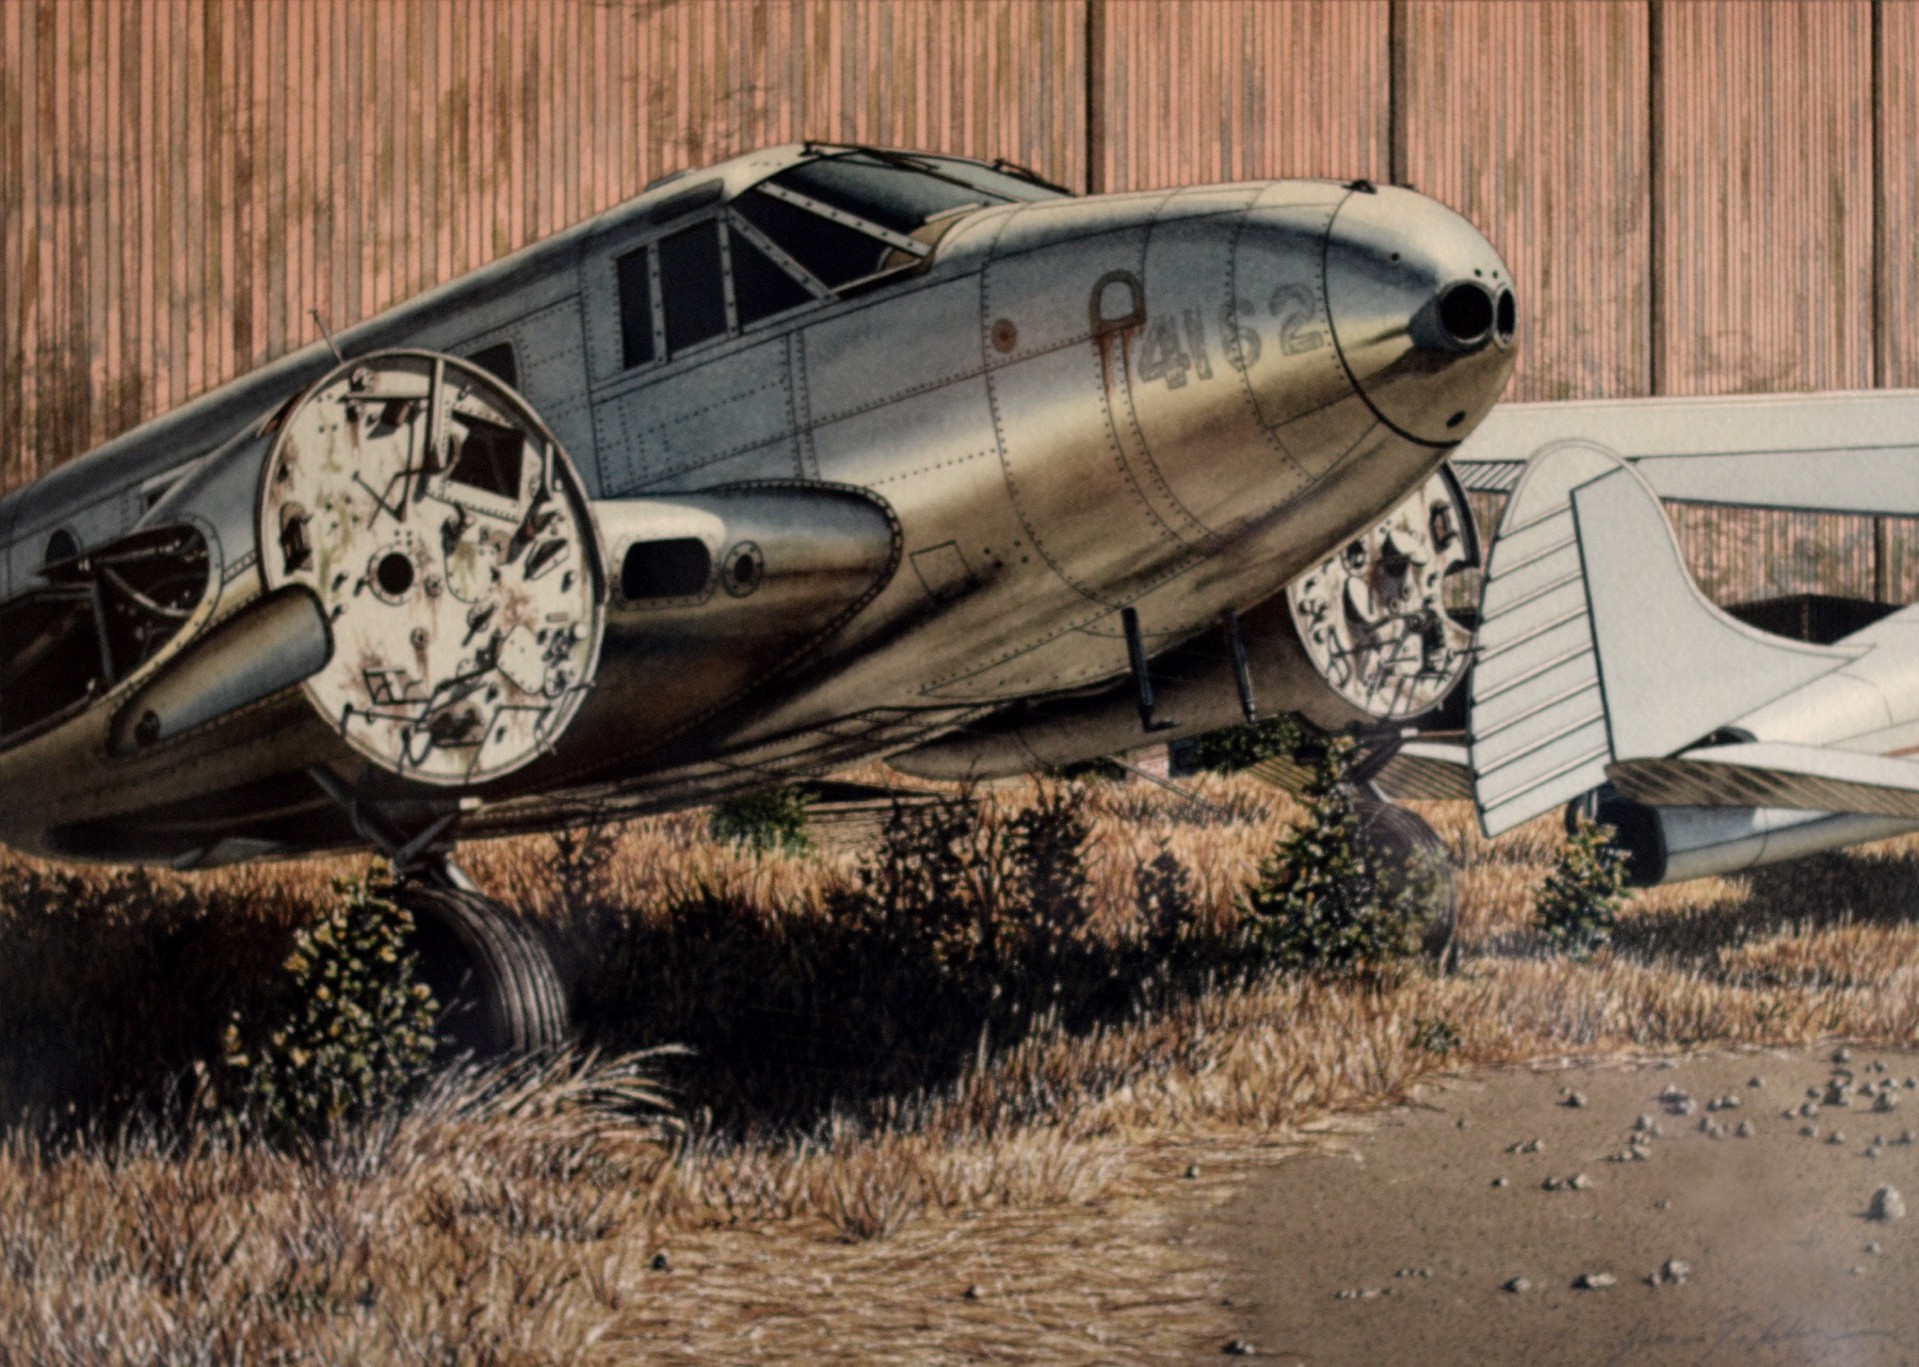 Grounded Angel by James Torlakson